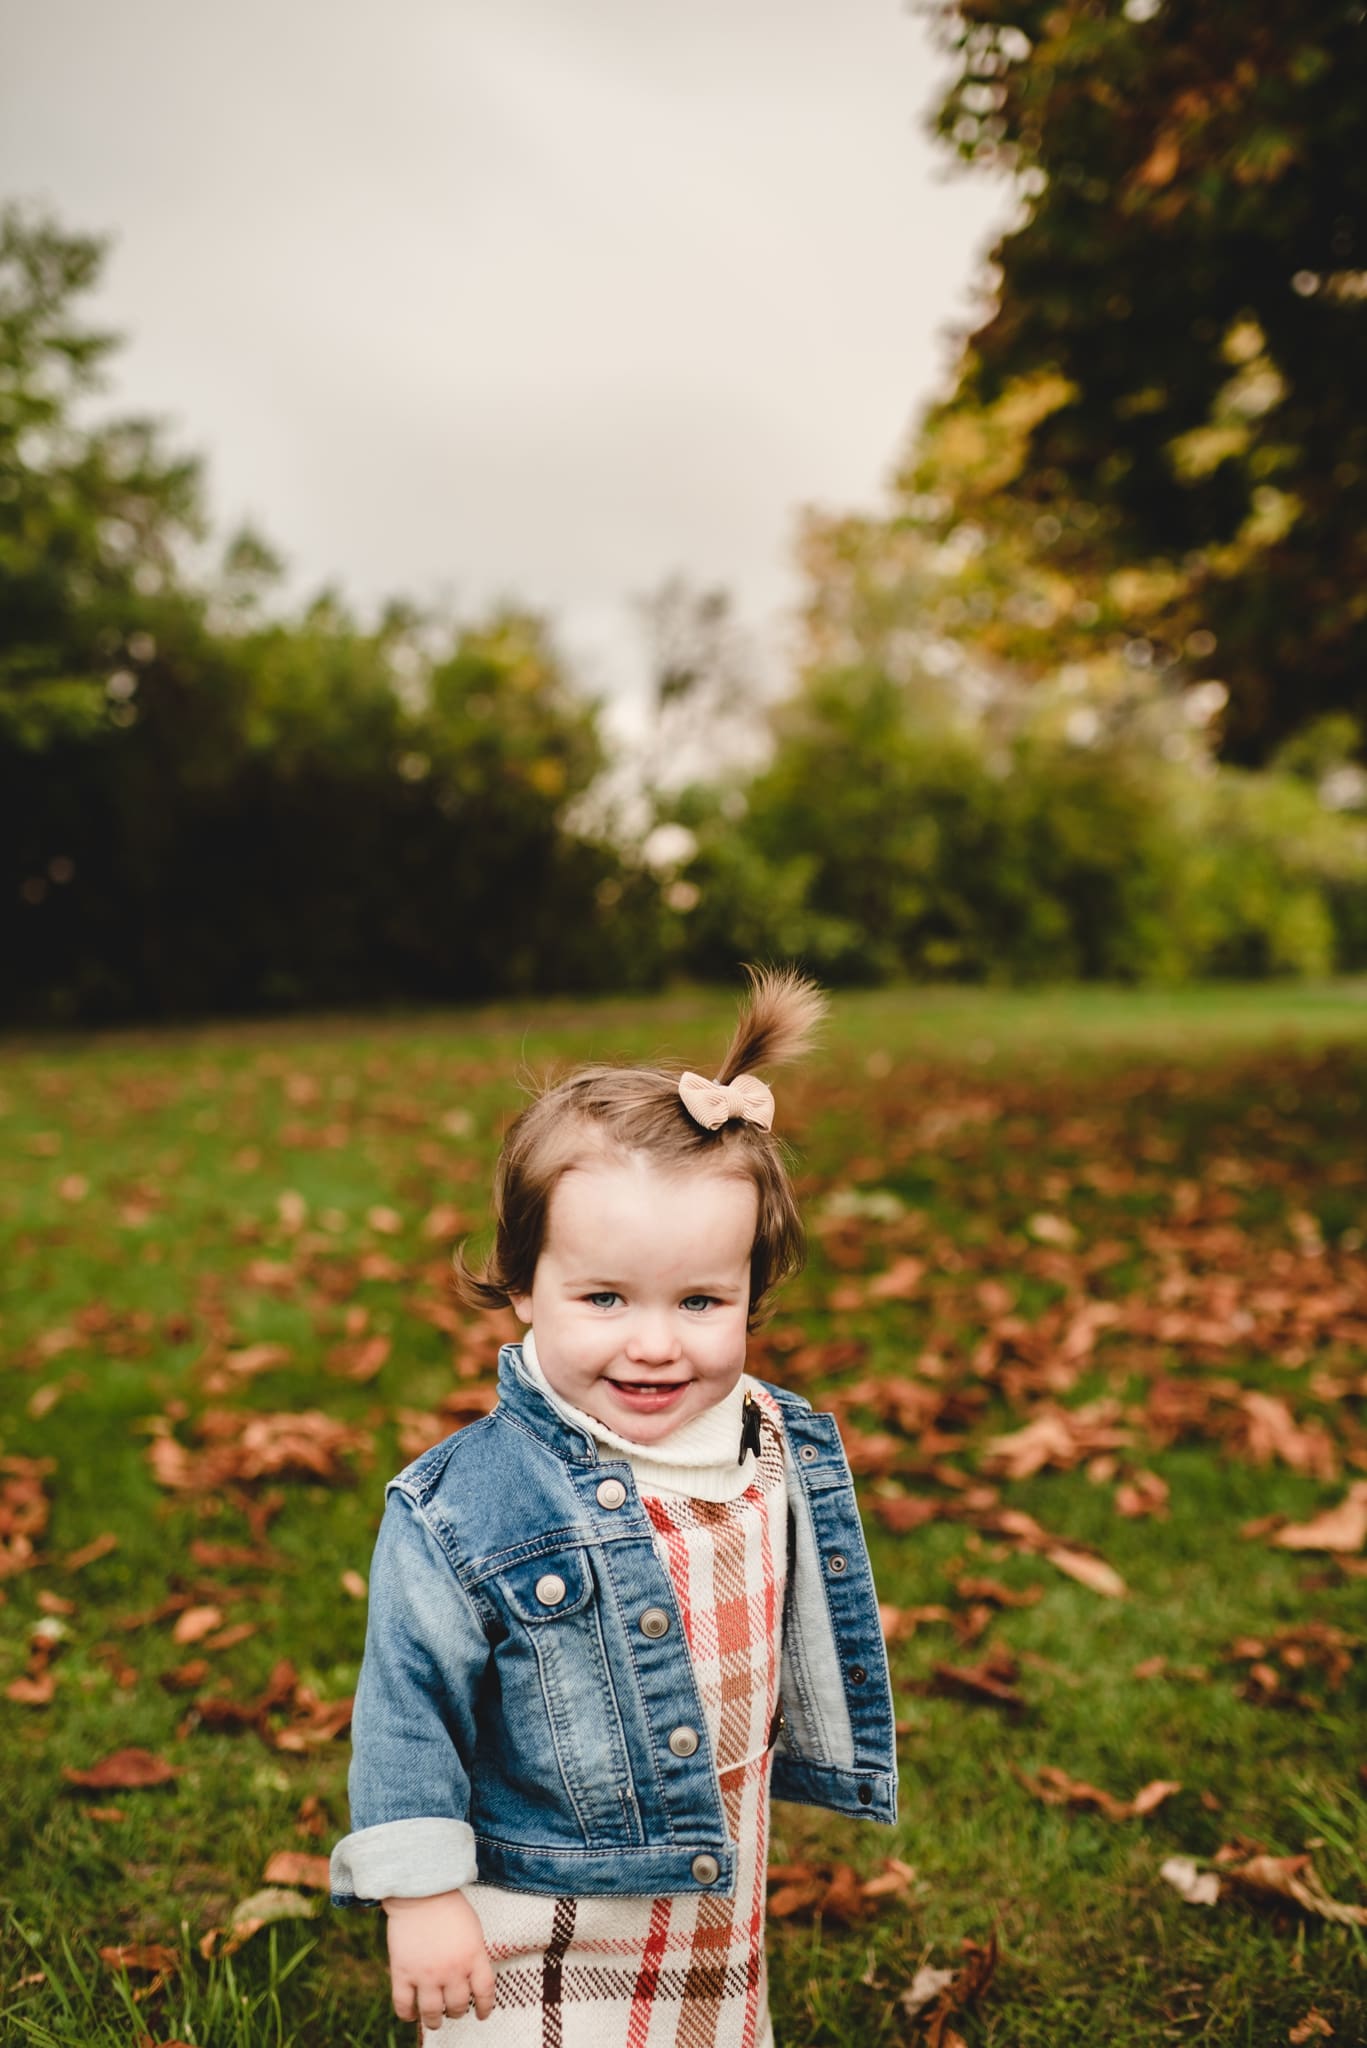 18 month old wearing plaid jumper and jean jacket